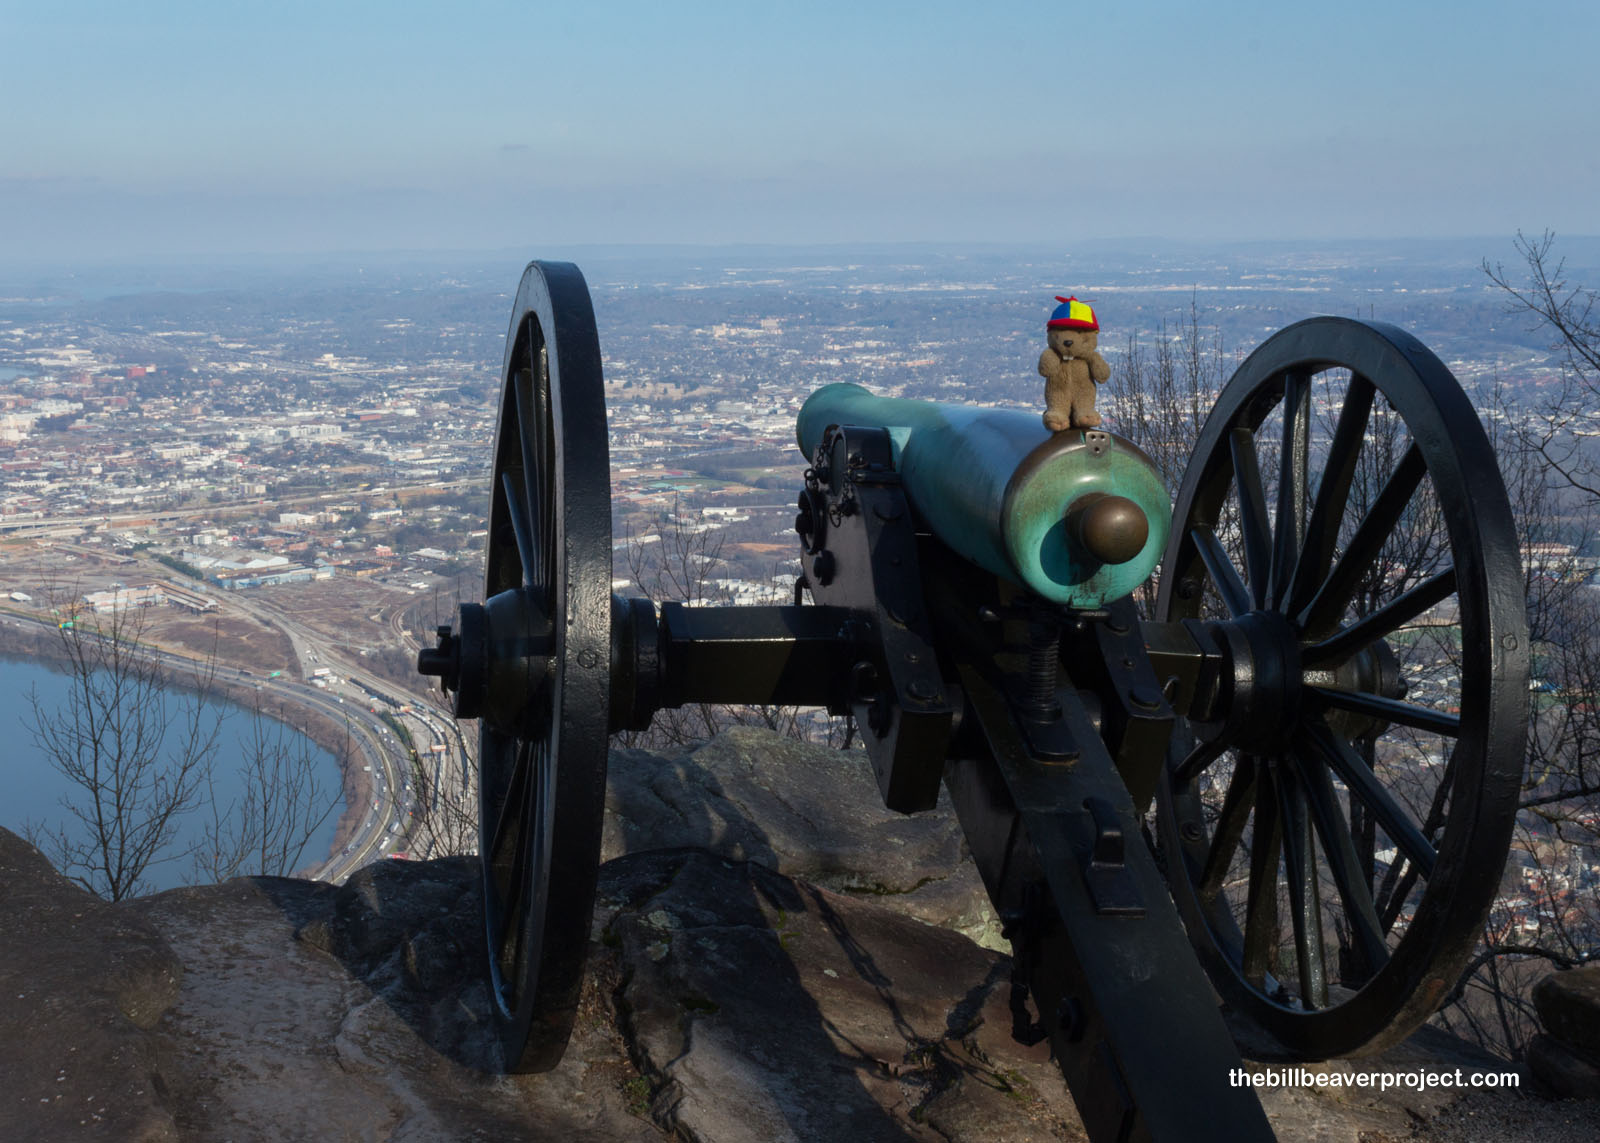 Unparalleled views of Chattanooga from Lookout Mountain!